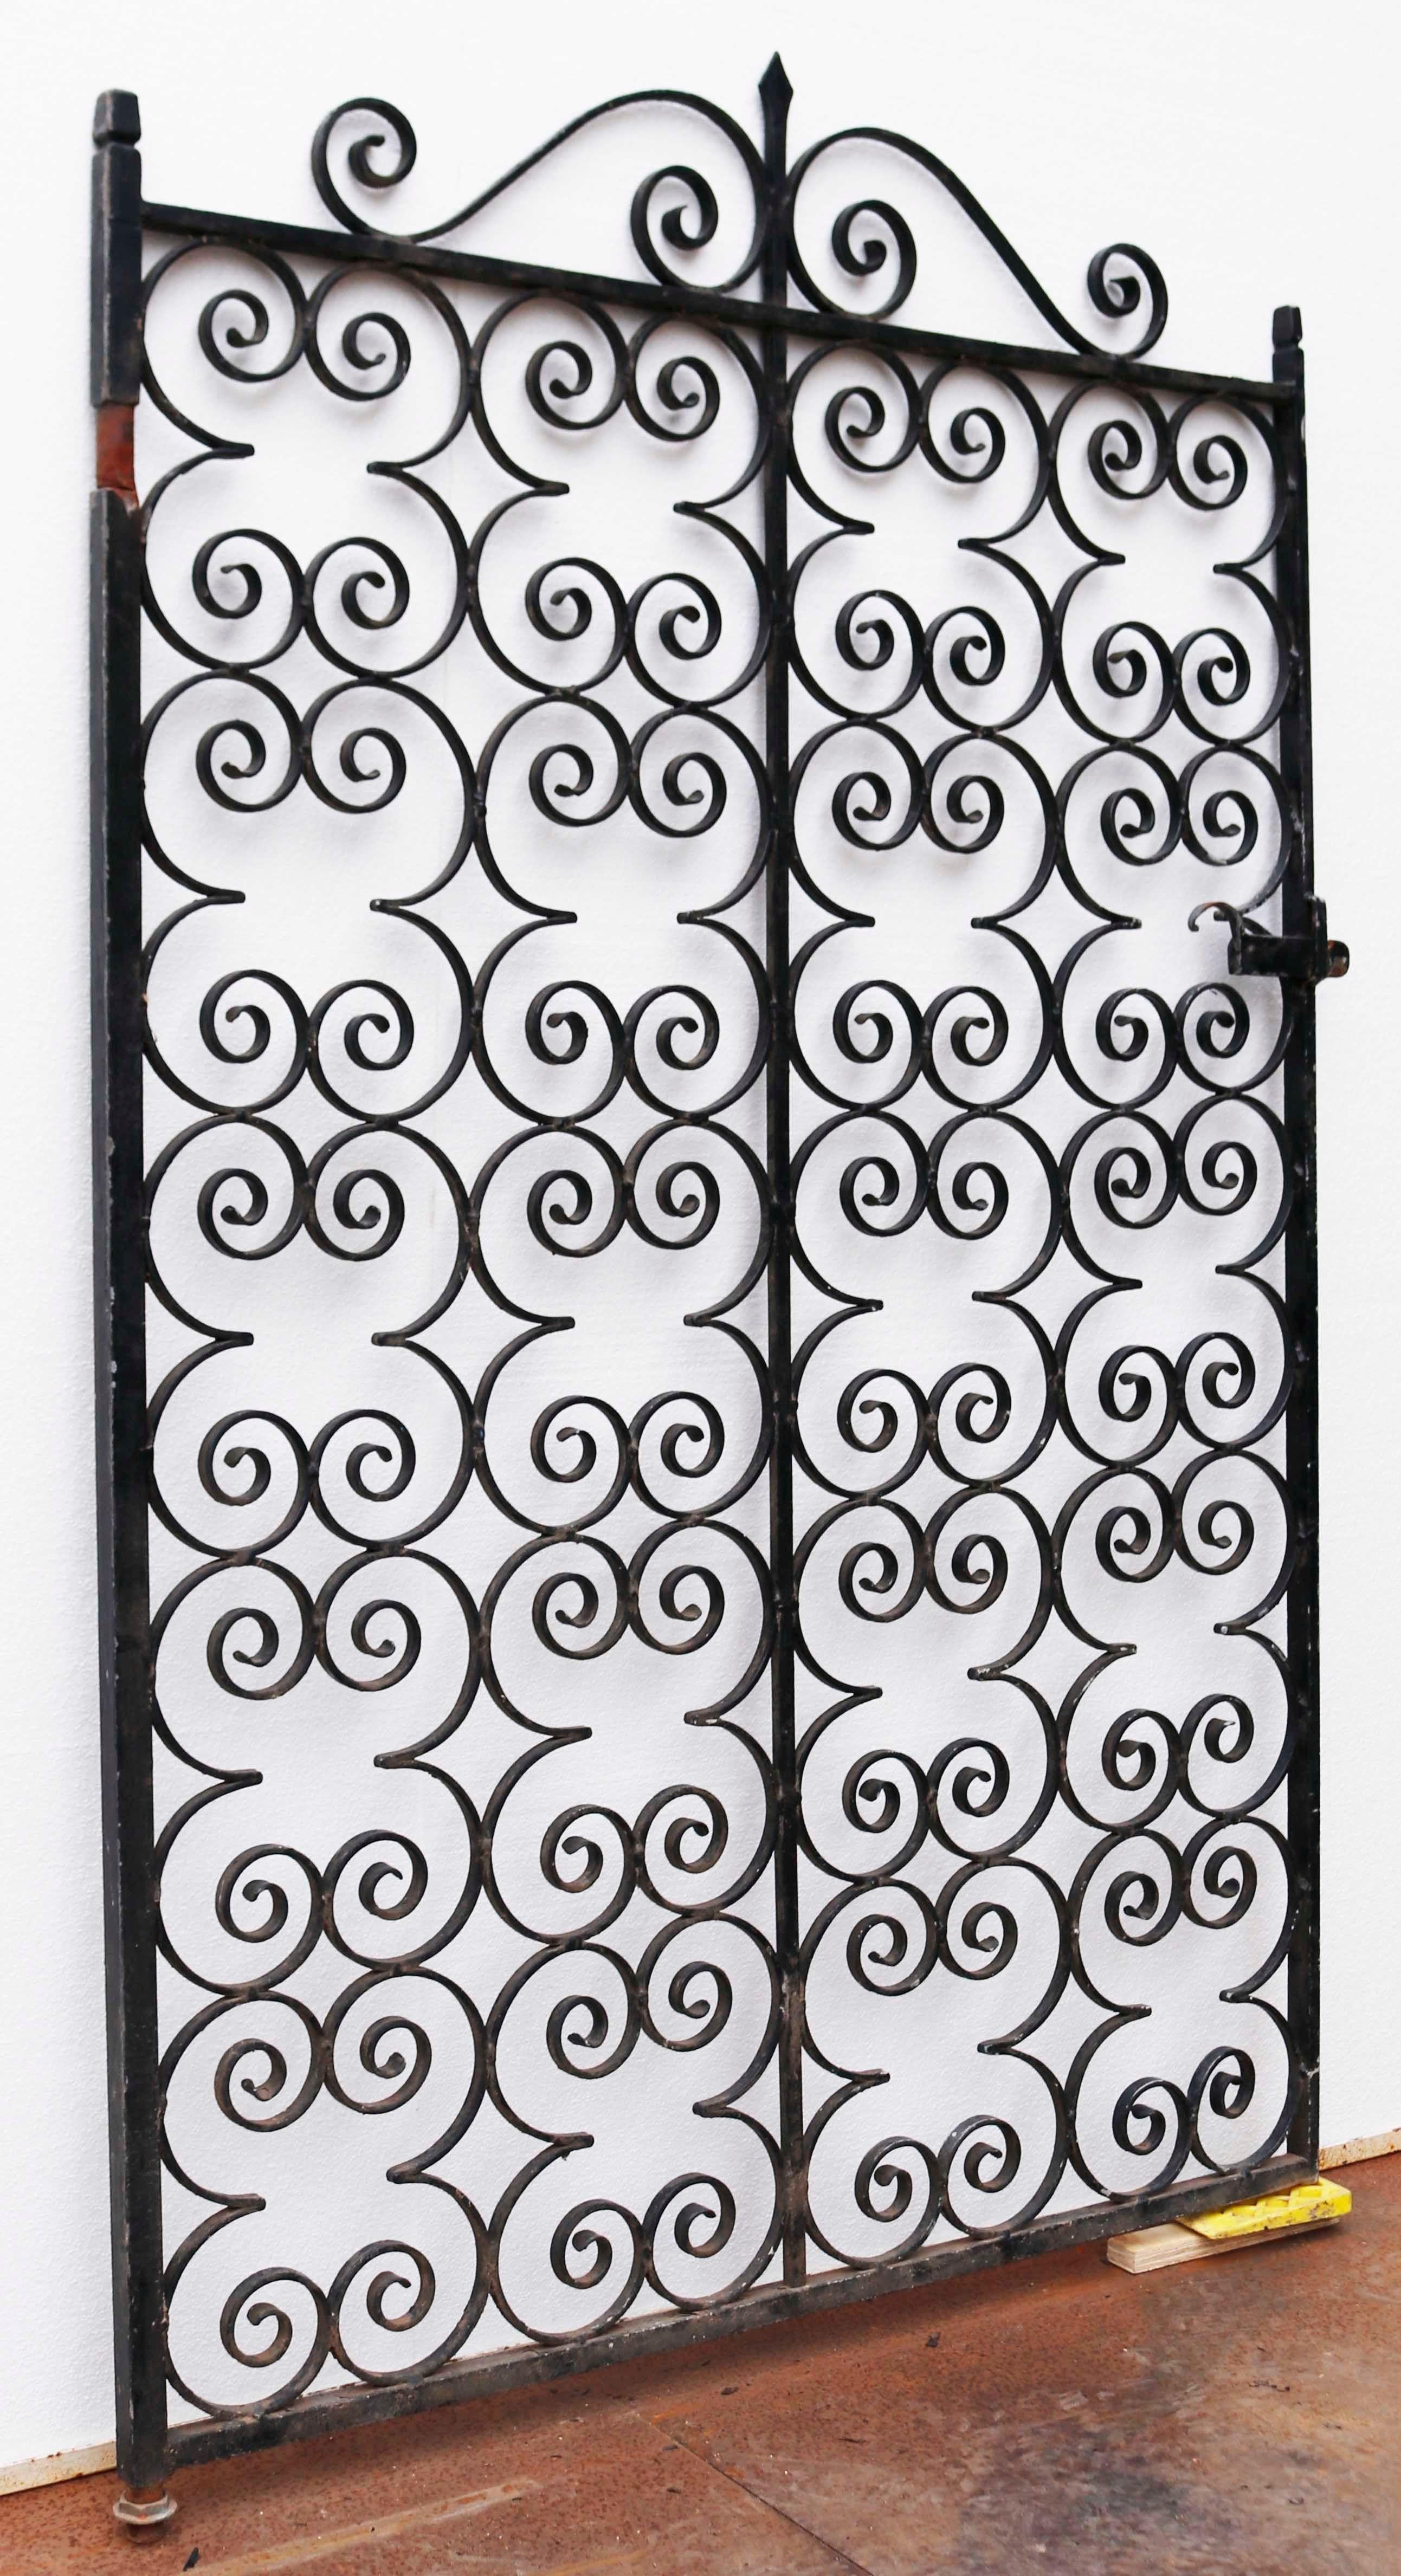 Wrought iron scroll work gate. Victorian scroll work side gate. Heavily decorated garden gate with a stunning ornate design.



What is wrought iron?

Wrought iron is a type of refined, low carbon iron that is smelted and worked on with tools.